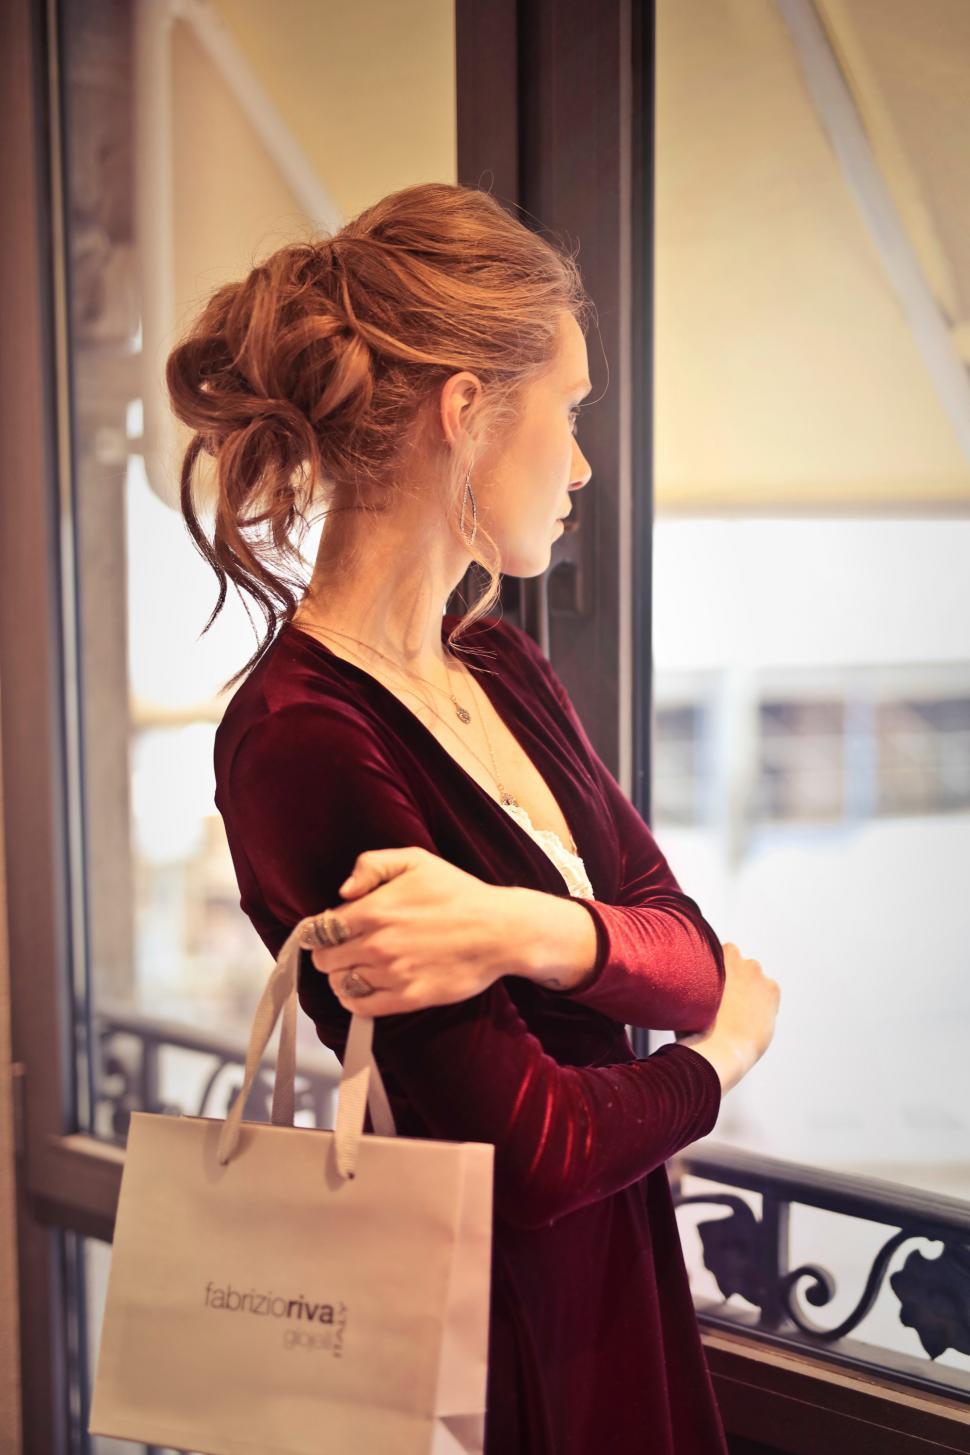 Free Stock Photo of A young blond woman with elegant hair bun holding a shopping  bag